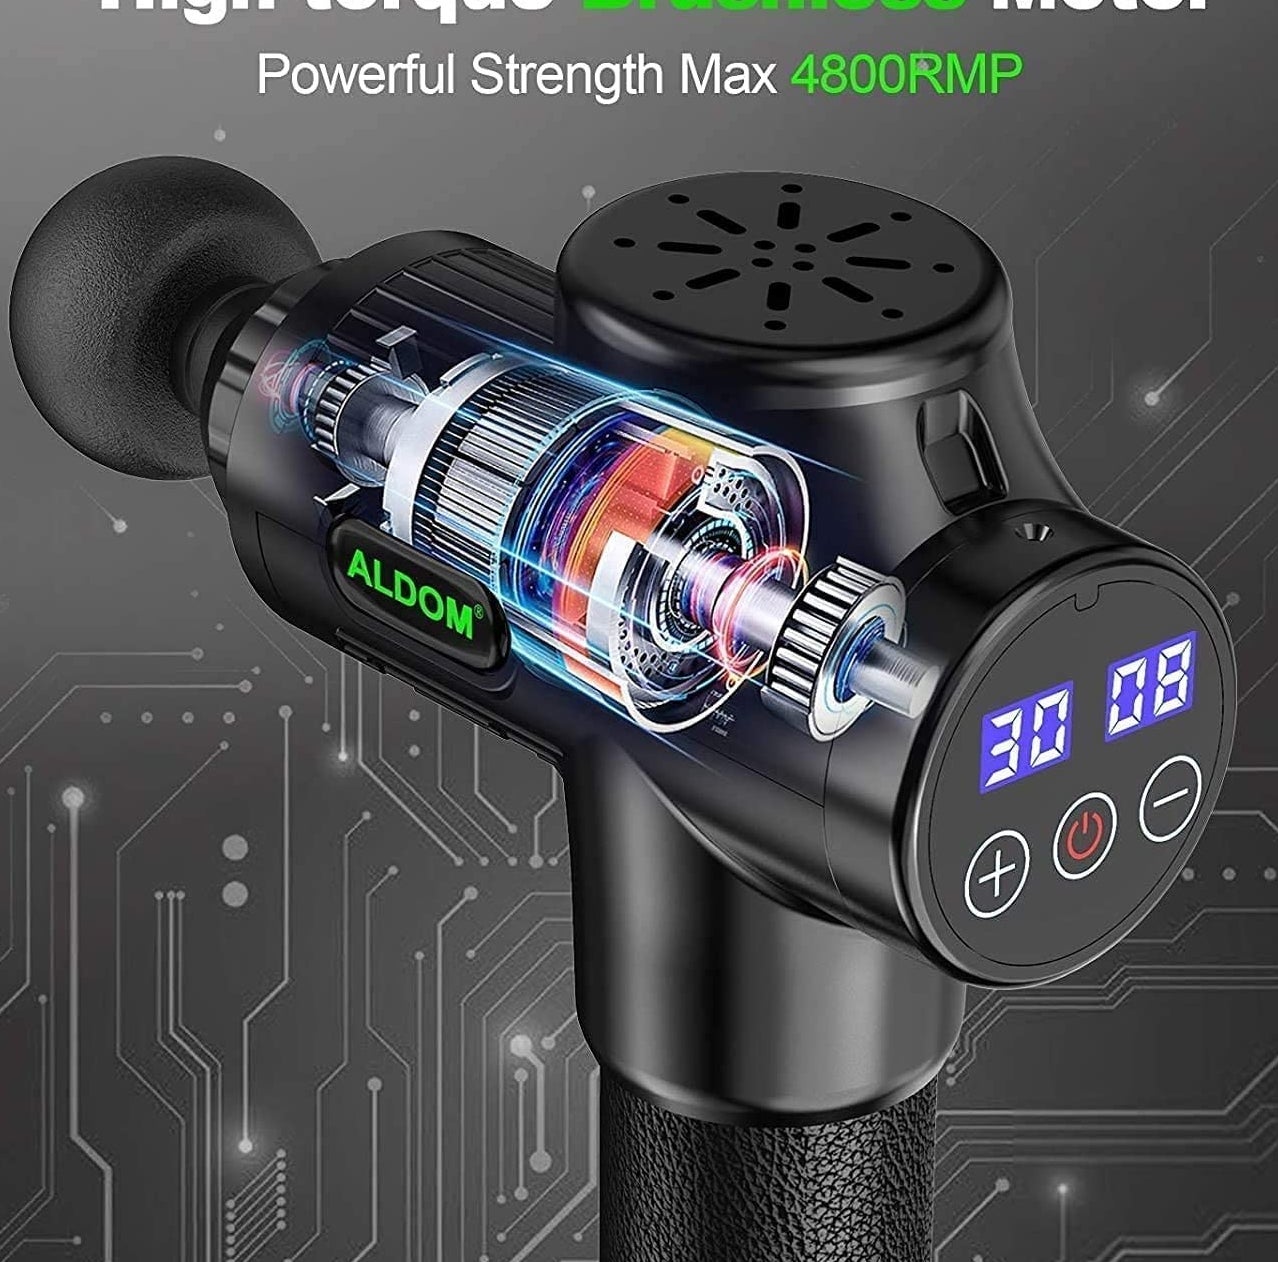 the massage gun on a patterned background